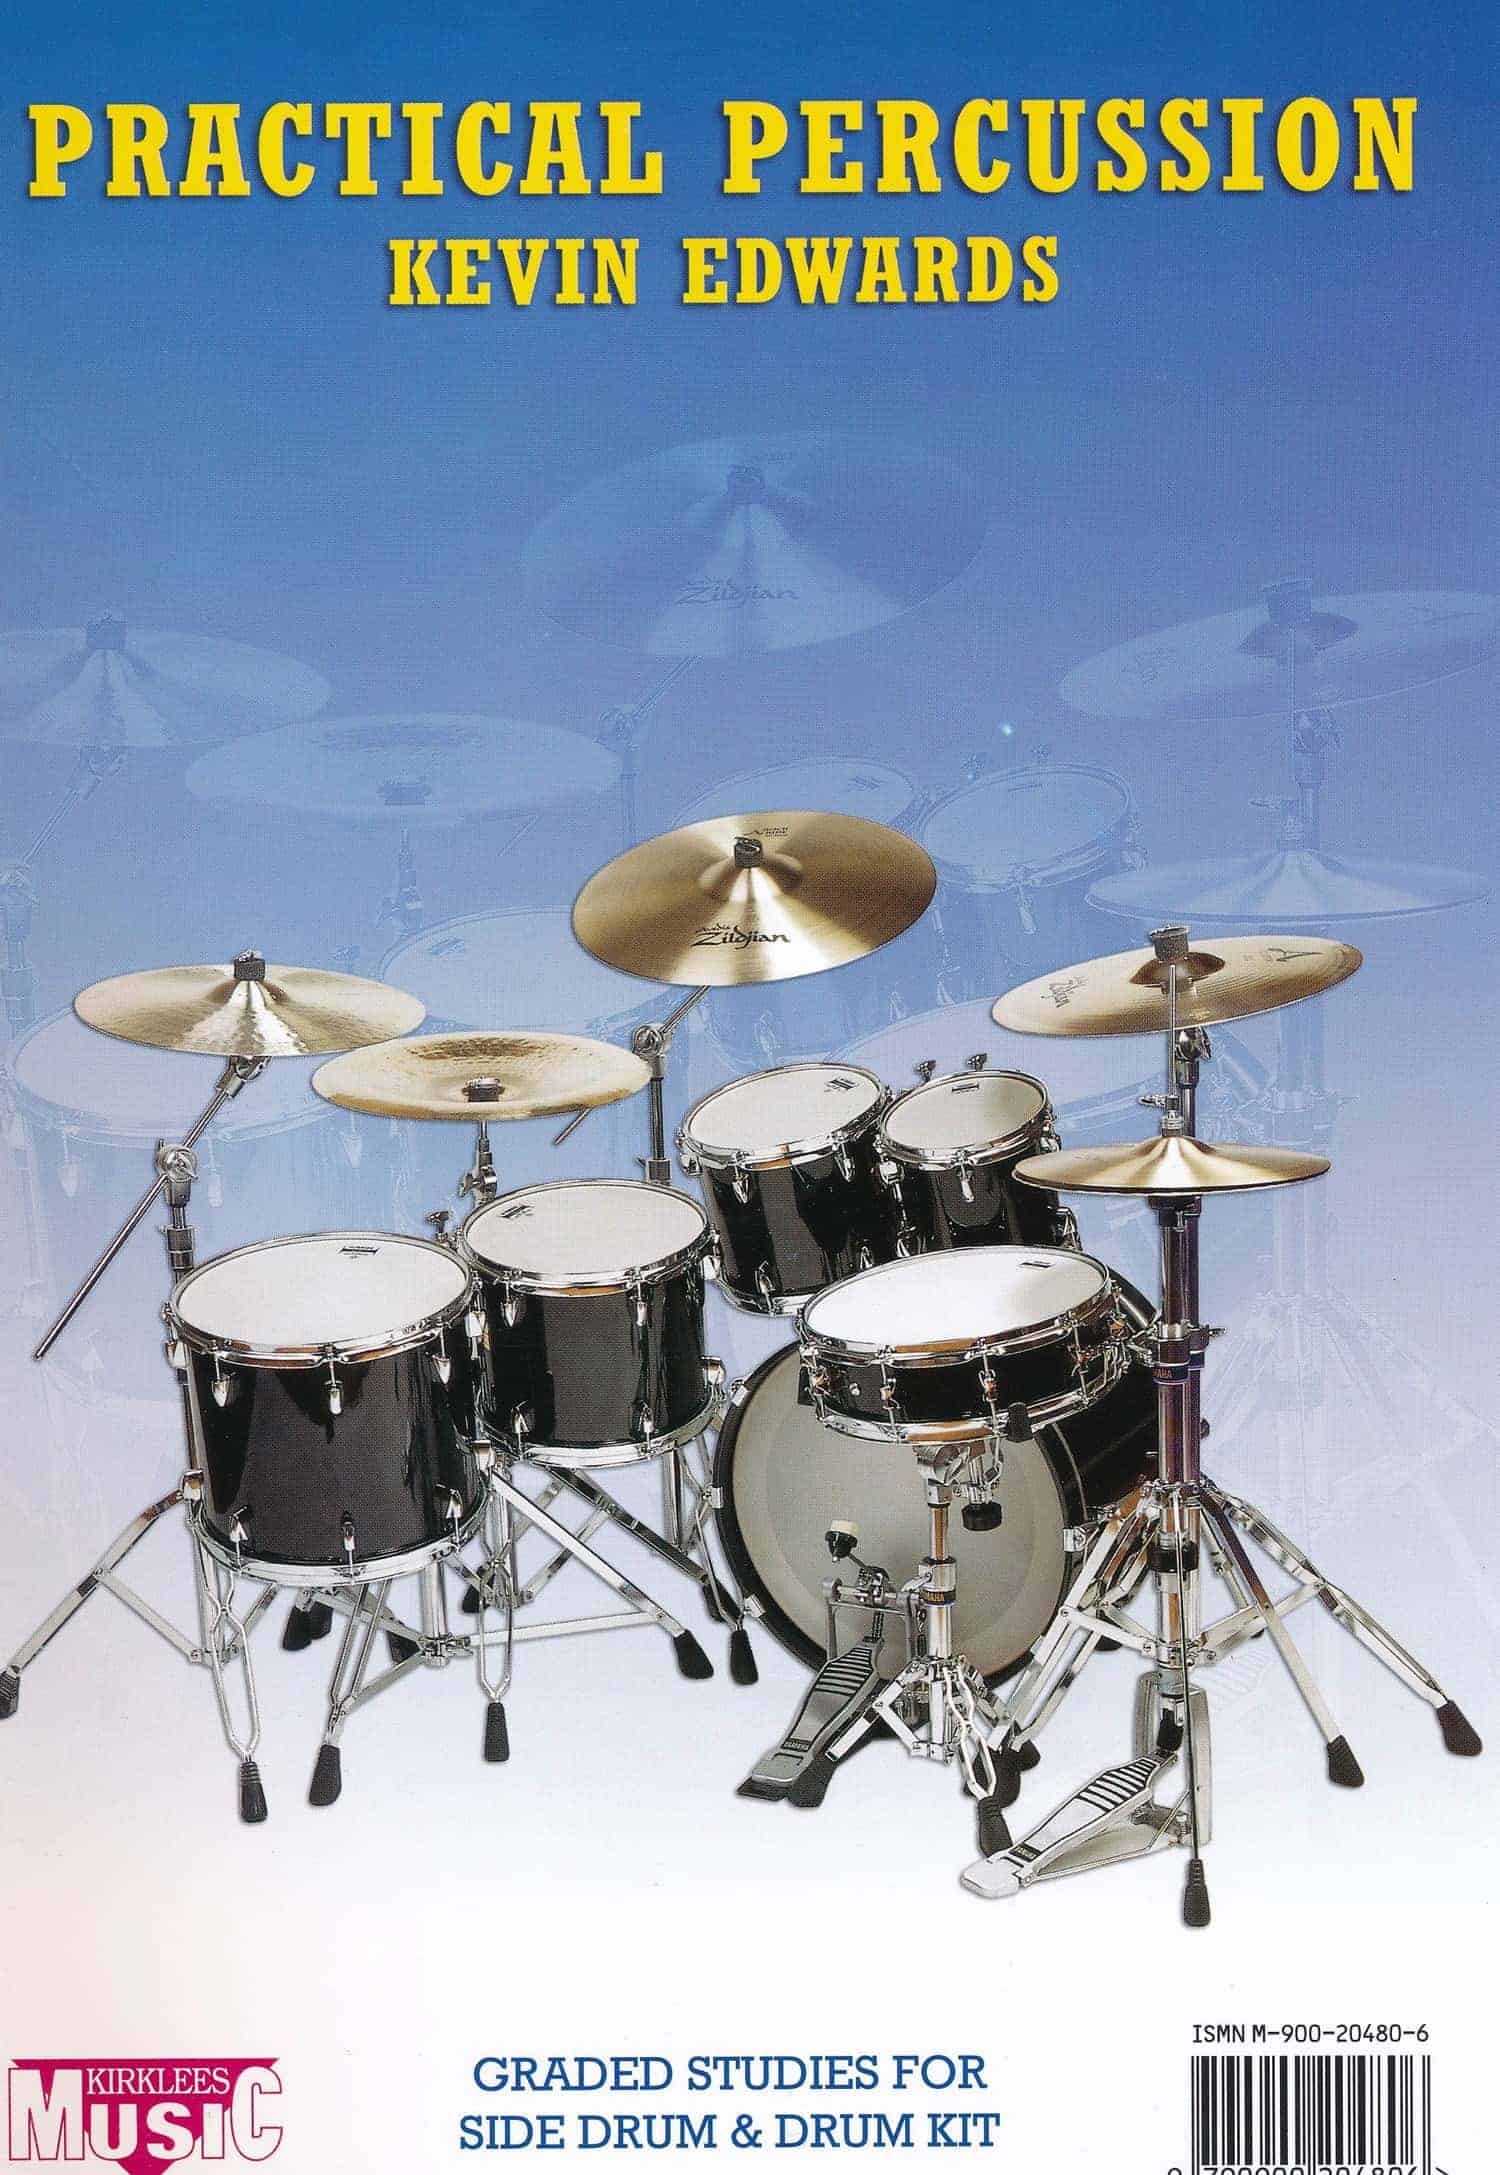 Practical Percussion, Graded Studies For Side Drum And Drum Kit